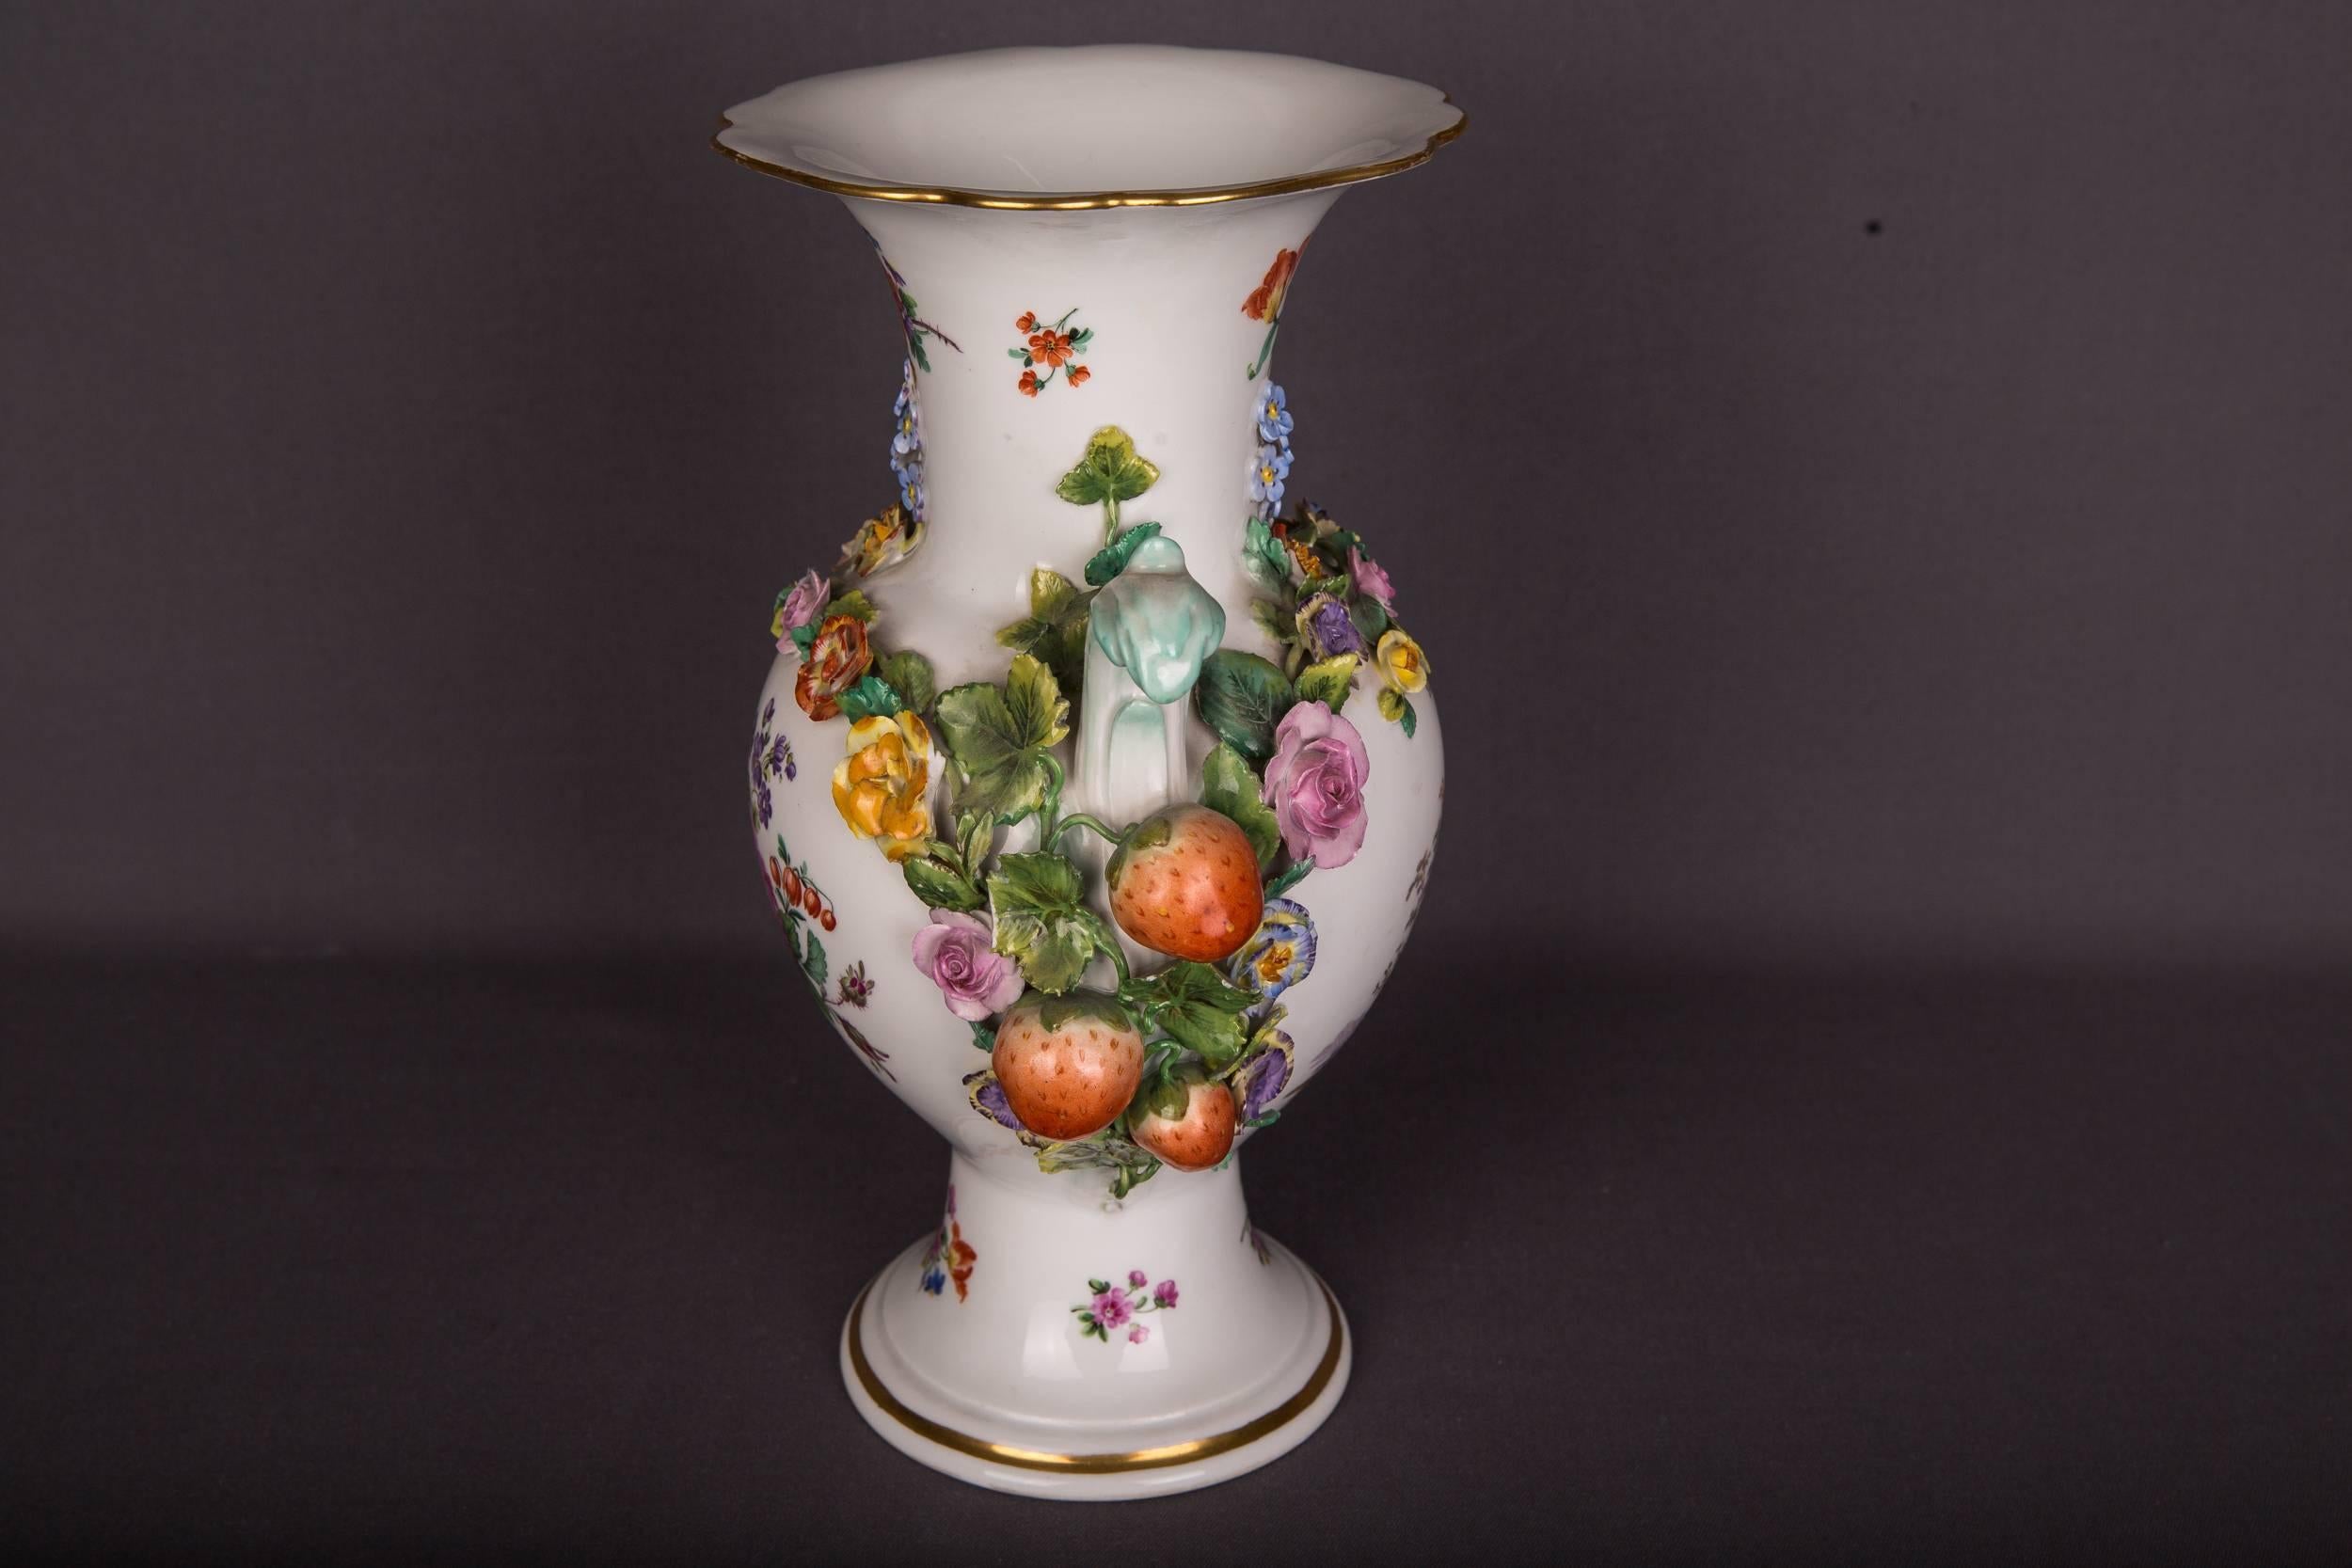 Fancy Meissen vase, circa 1820-1840

Baluster-shaped vase with fruit and flowers. Painting with fine-painted Watteau painting, other flowers full of flowers.

Very elaborate and finely painted.

Very Fine finish.

Meissen 1st choice.